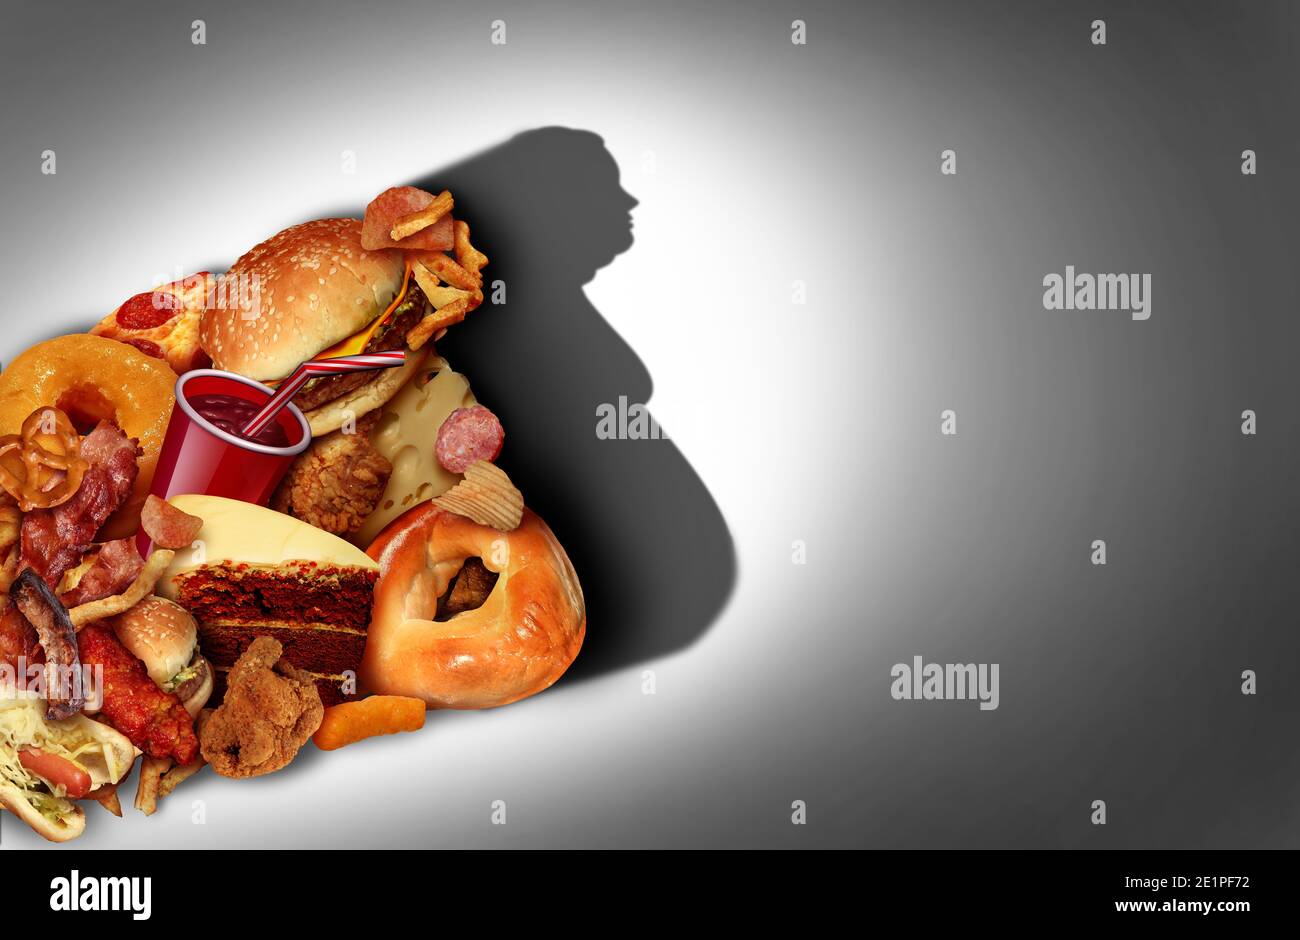 Obesity and unhealthy lifestyle or eating fat food concept as fast food and bad nutrition as an obese symbol for dieting and overweight control. Stock Photo